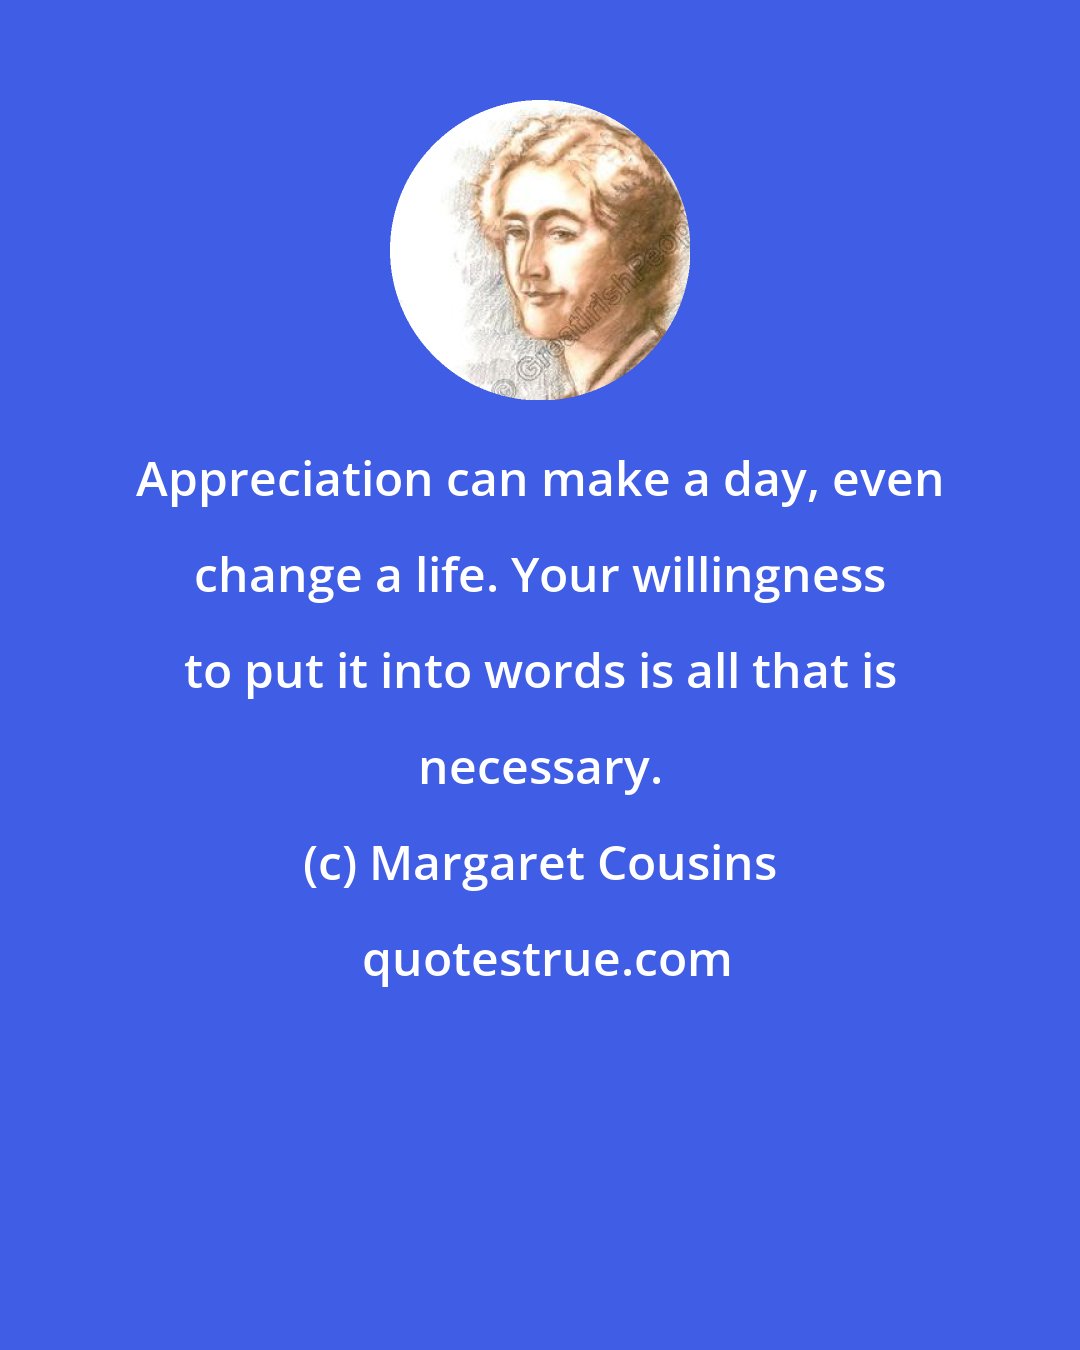 Margaret Cousins: Appreciation can make a day, even change a life. Your willingness to put it into words is all that is necessary.